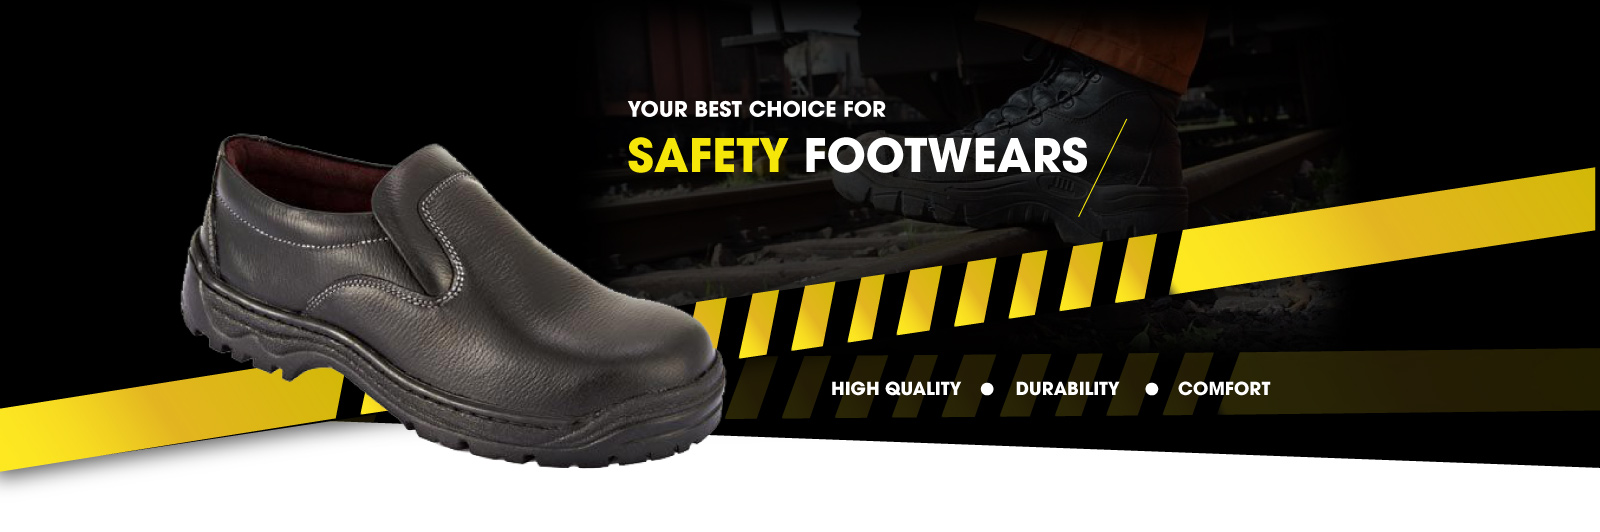 Safety Shoes Supplier & Manufacturer in Malaysia, Fosser Safety ...